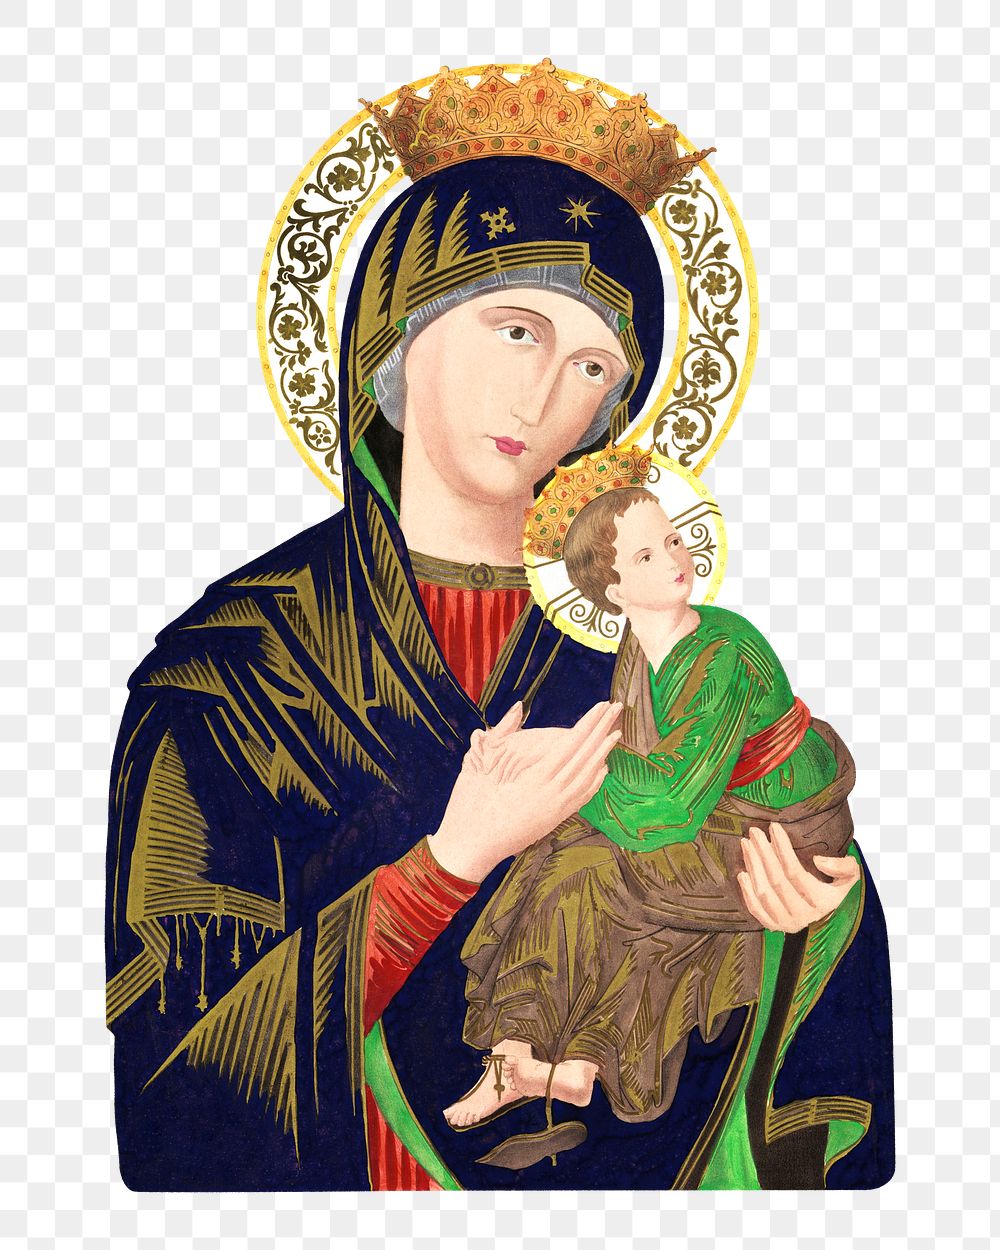 Png S. Maria de Perpetuo Succursu, Our Lady of Perpetual Help on transparent background.  Remastered by rawpixel